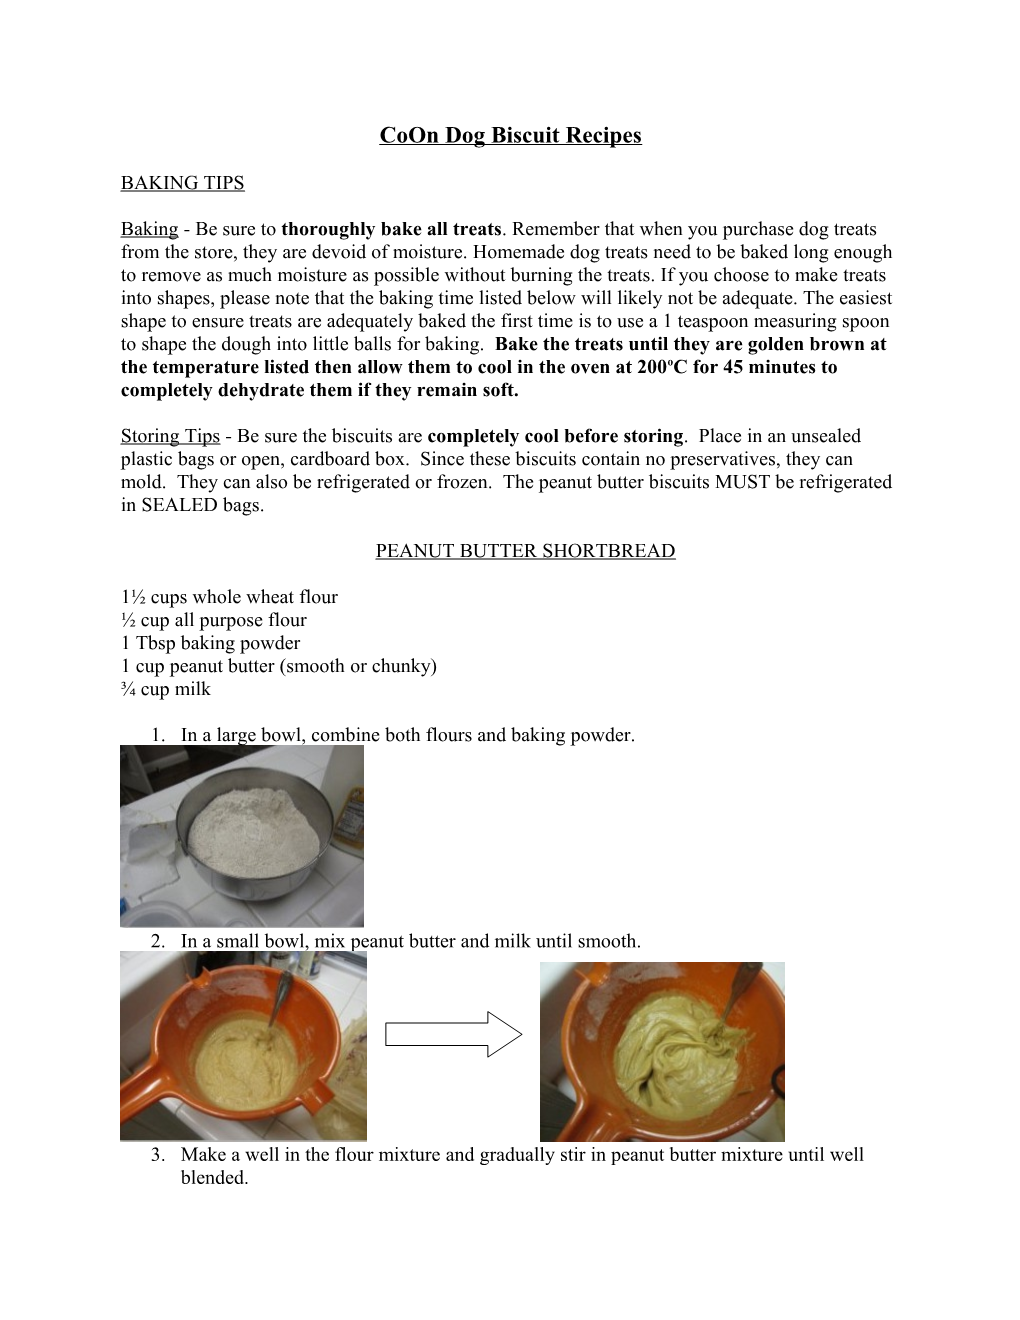 Coon Dog Biscuit Recipes